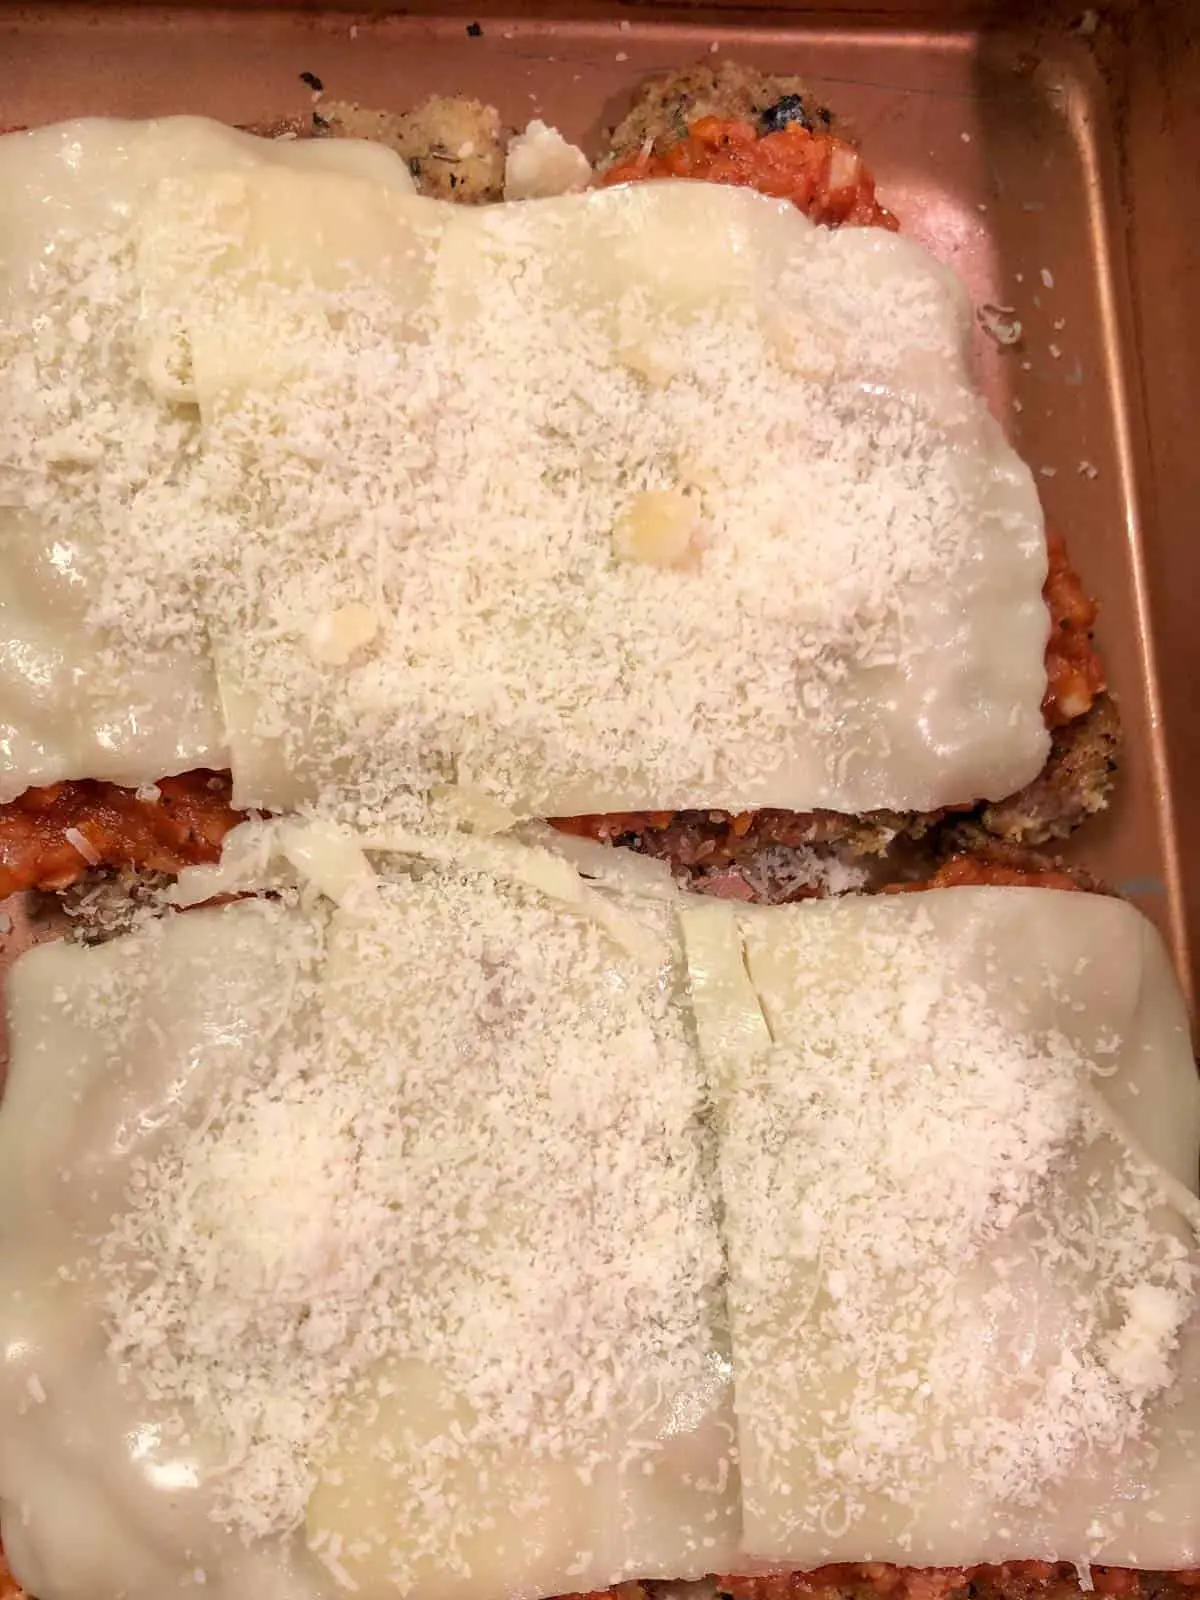 Breaded veal cutlets topped with tomato sauce then topped with slices of mozzarella cheese and freshly grated Parmesan cheese in a roasting pan.